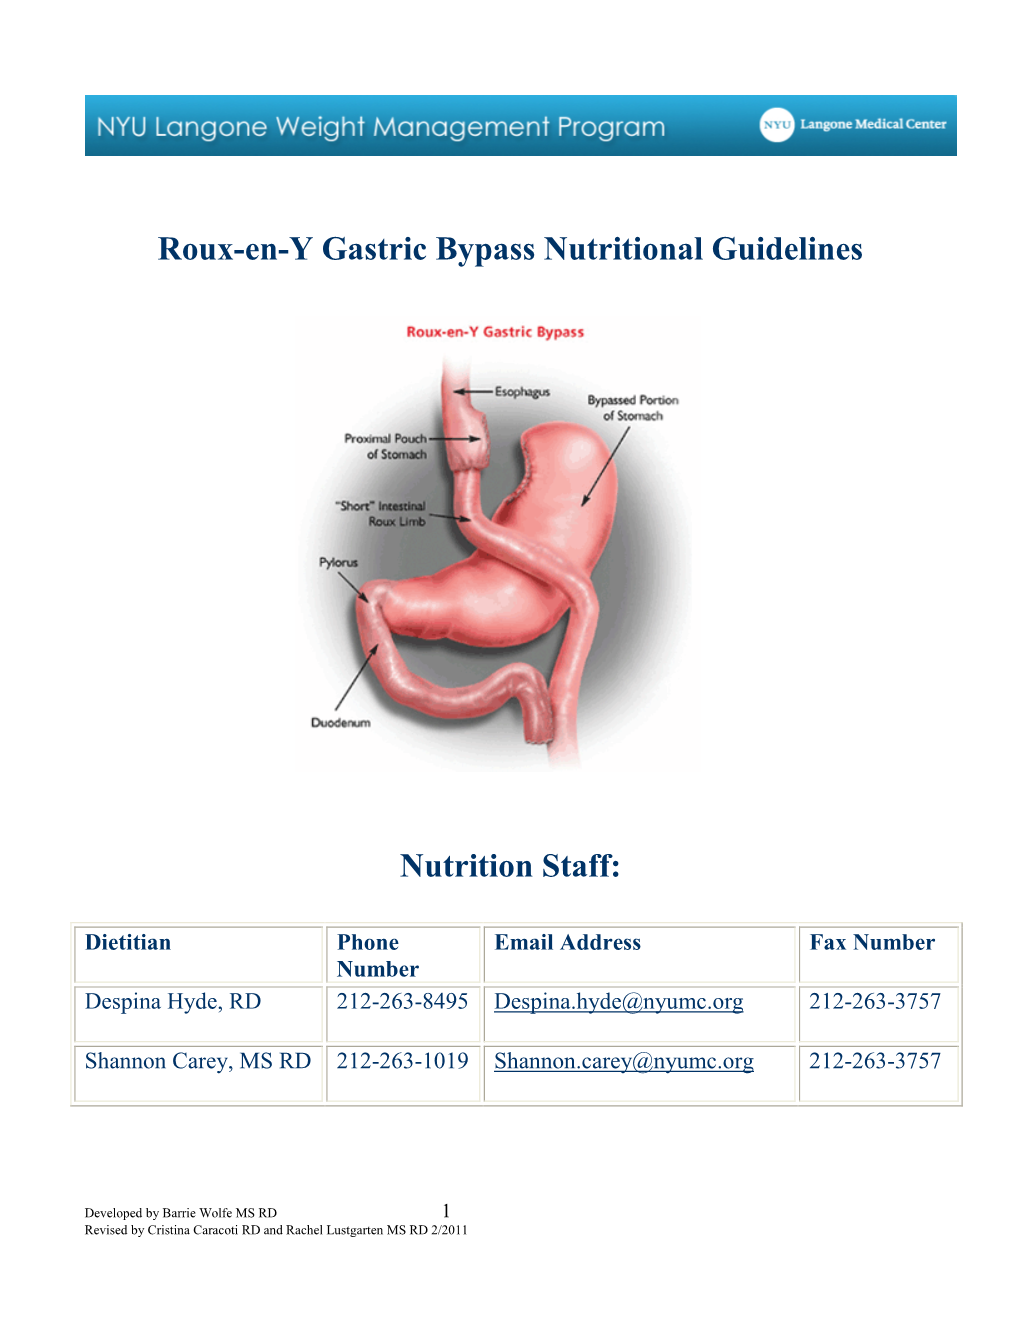 Roux-En-Y Gastric Bypass Nutritional Guidelines Nutrition Staff